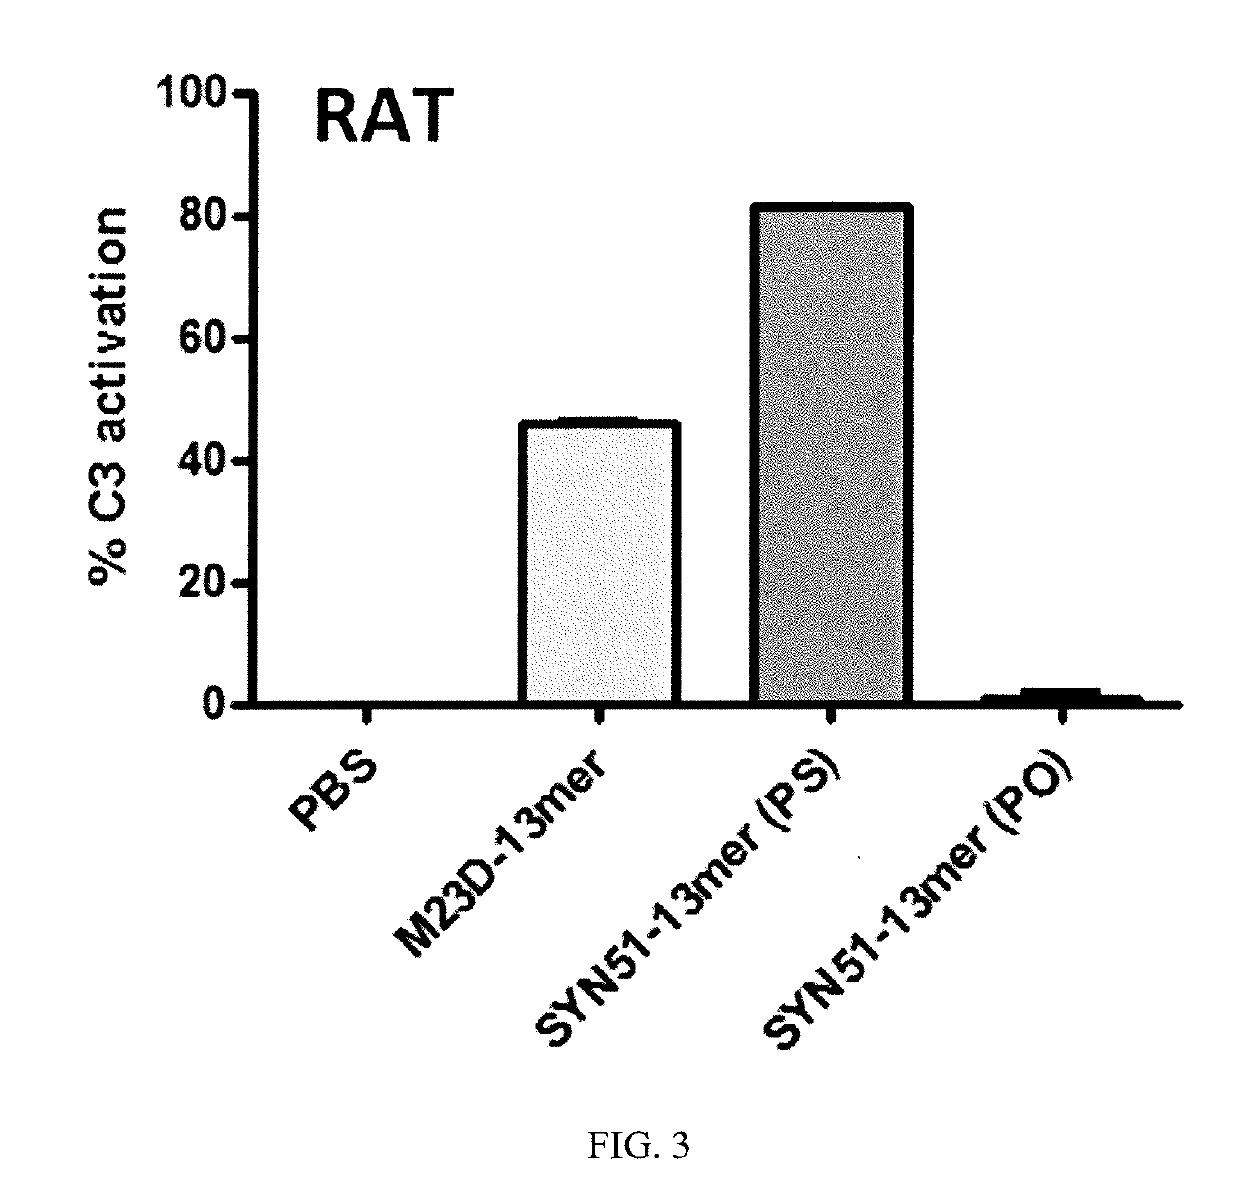 Mixed Tricyclo-DNA, 2'-Modified RNA Oligonucleotide Compositions and Uses Thereof